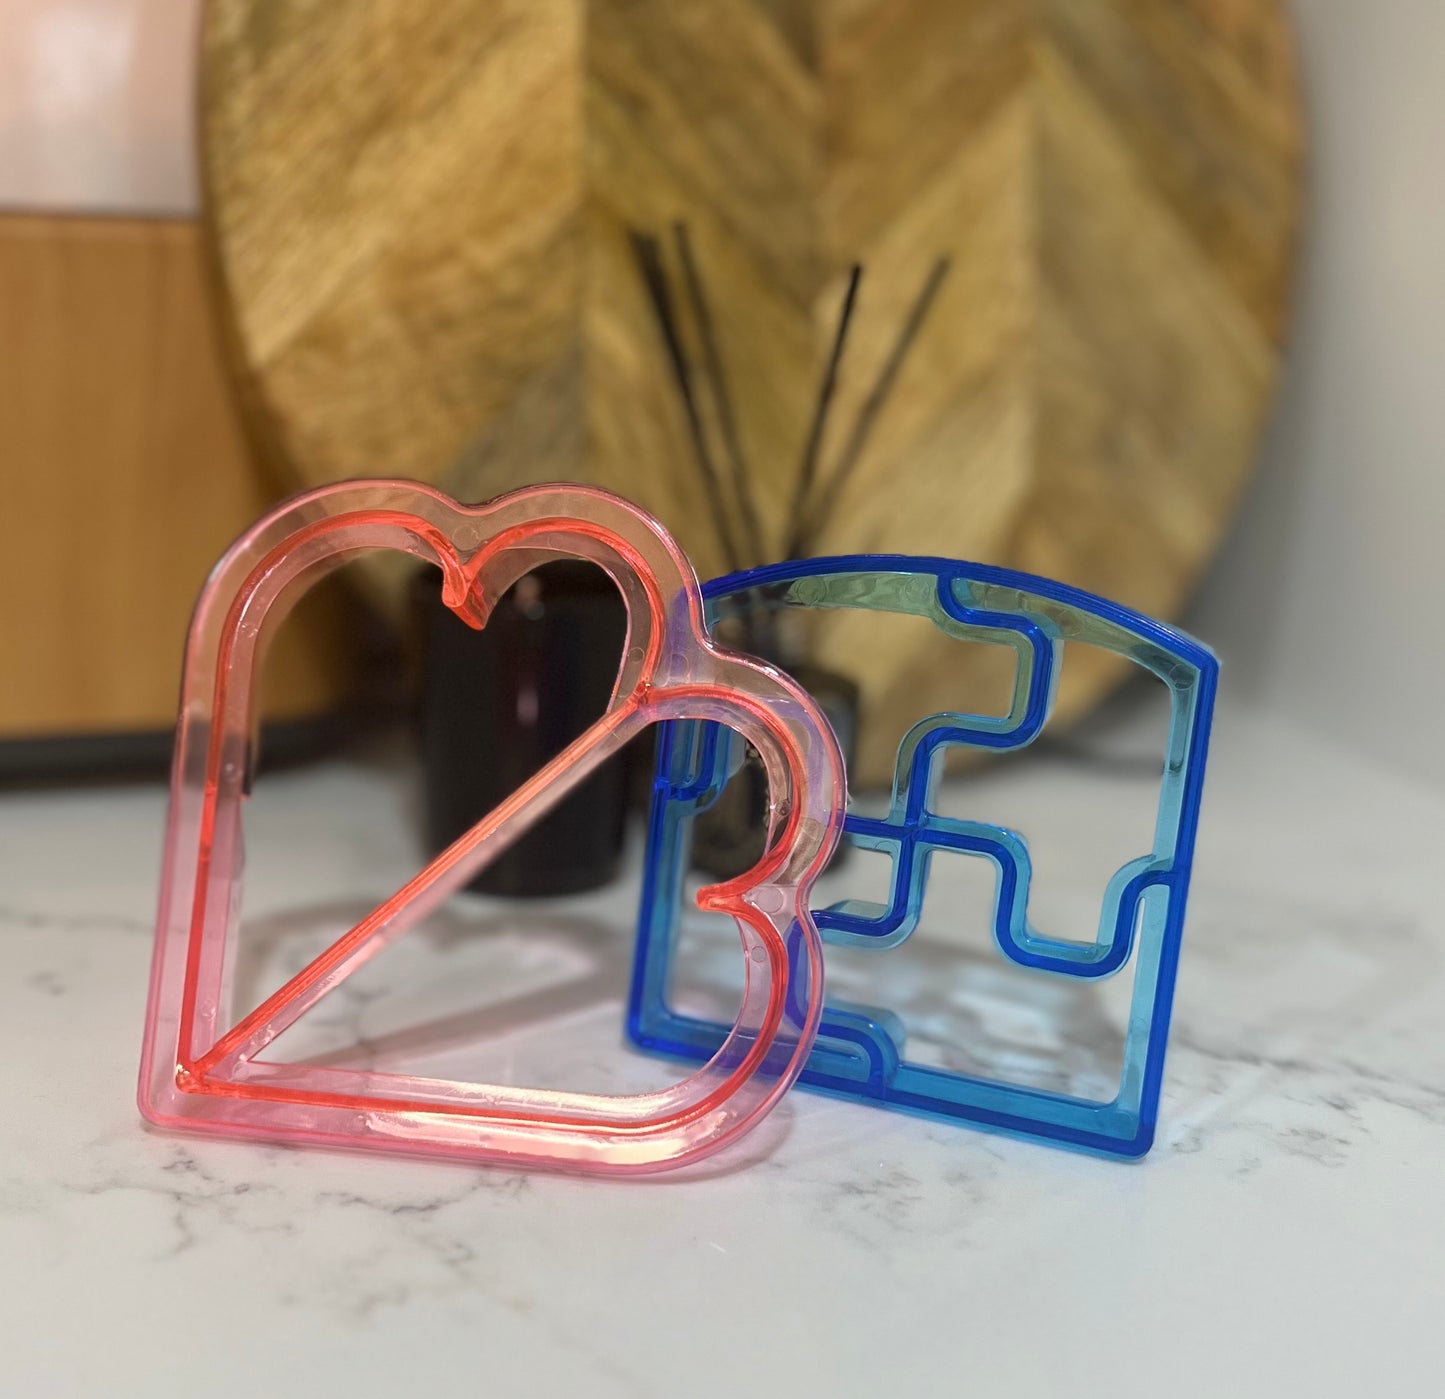 New! Sandwhich shape cutters- heart and puzzle